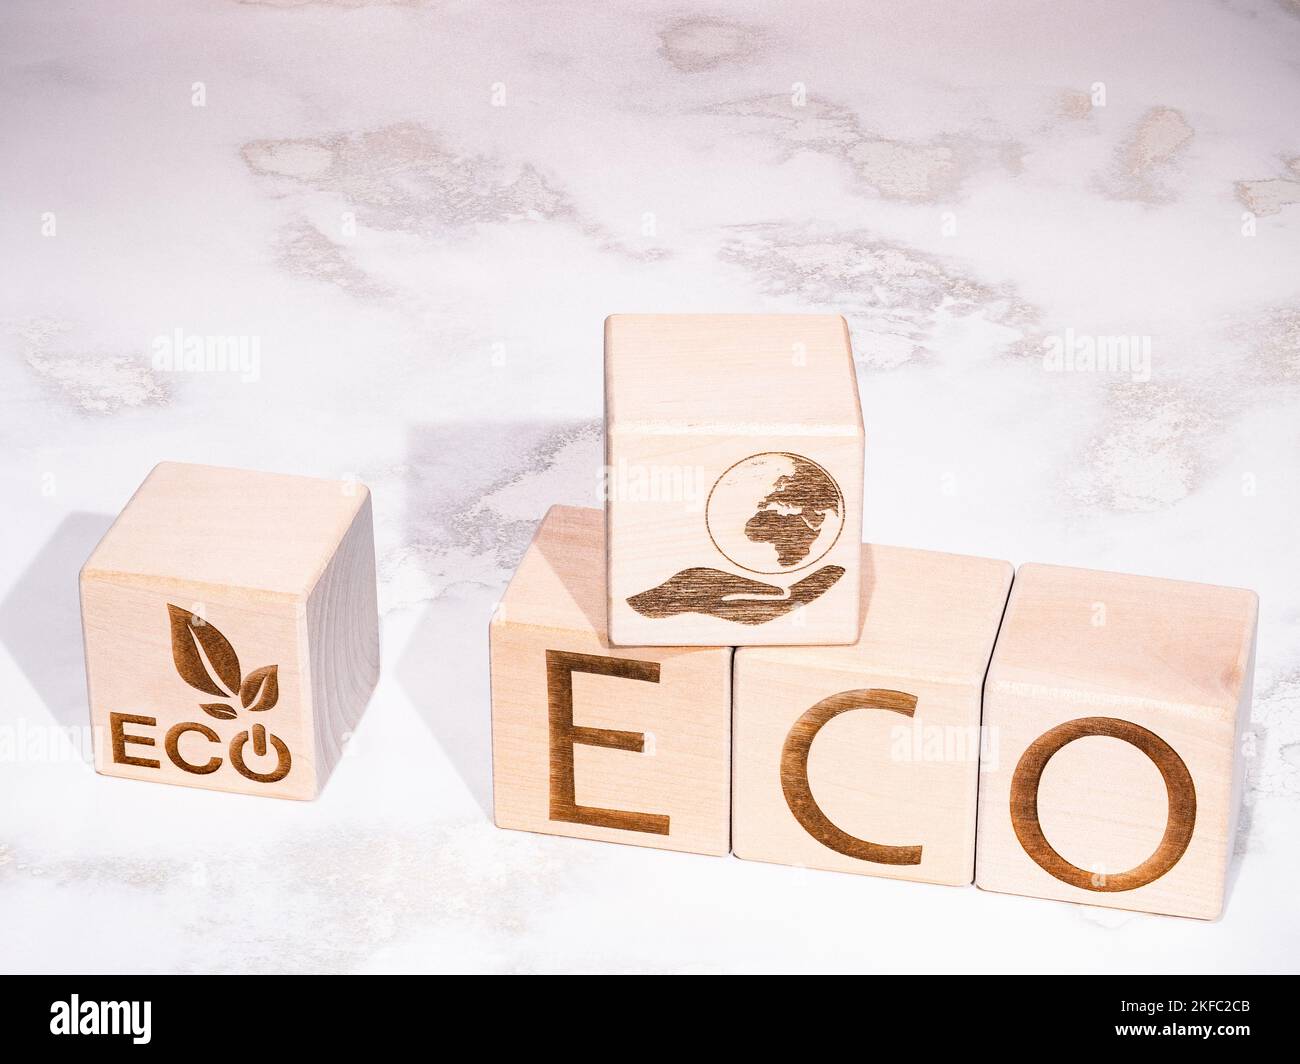 ECO text on wooden cubes as an environmental support concept Stock Photo